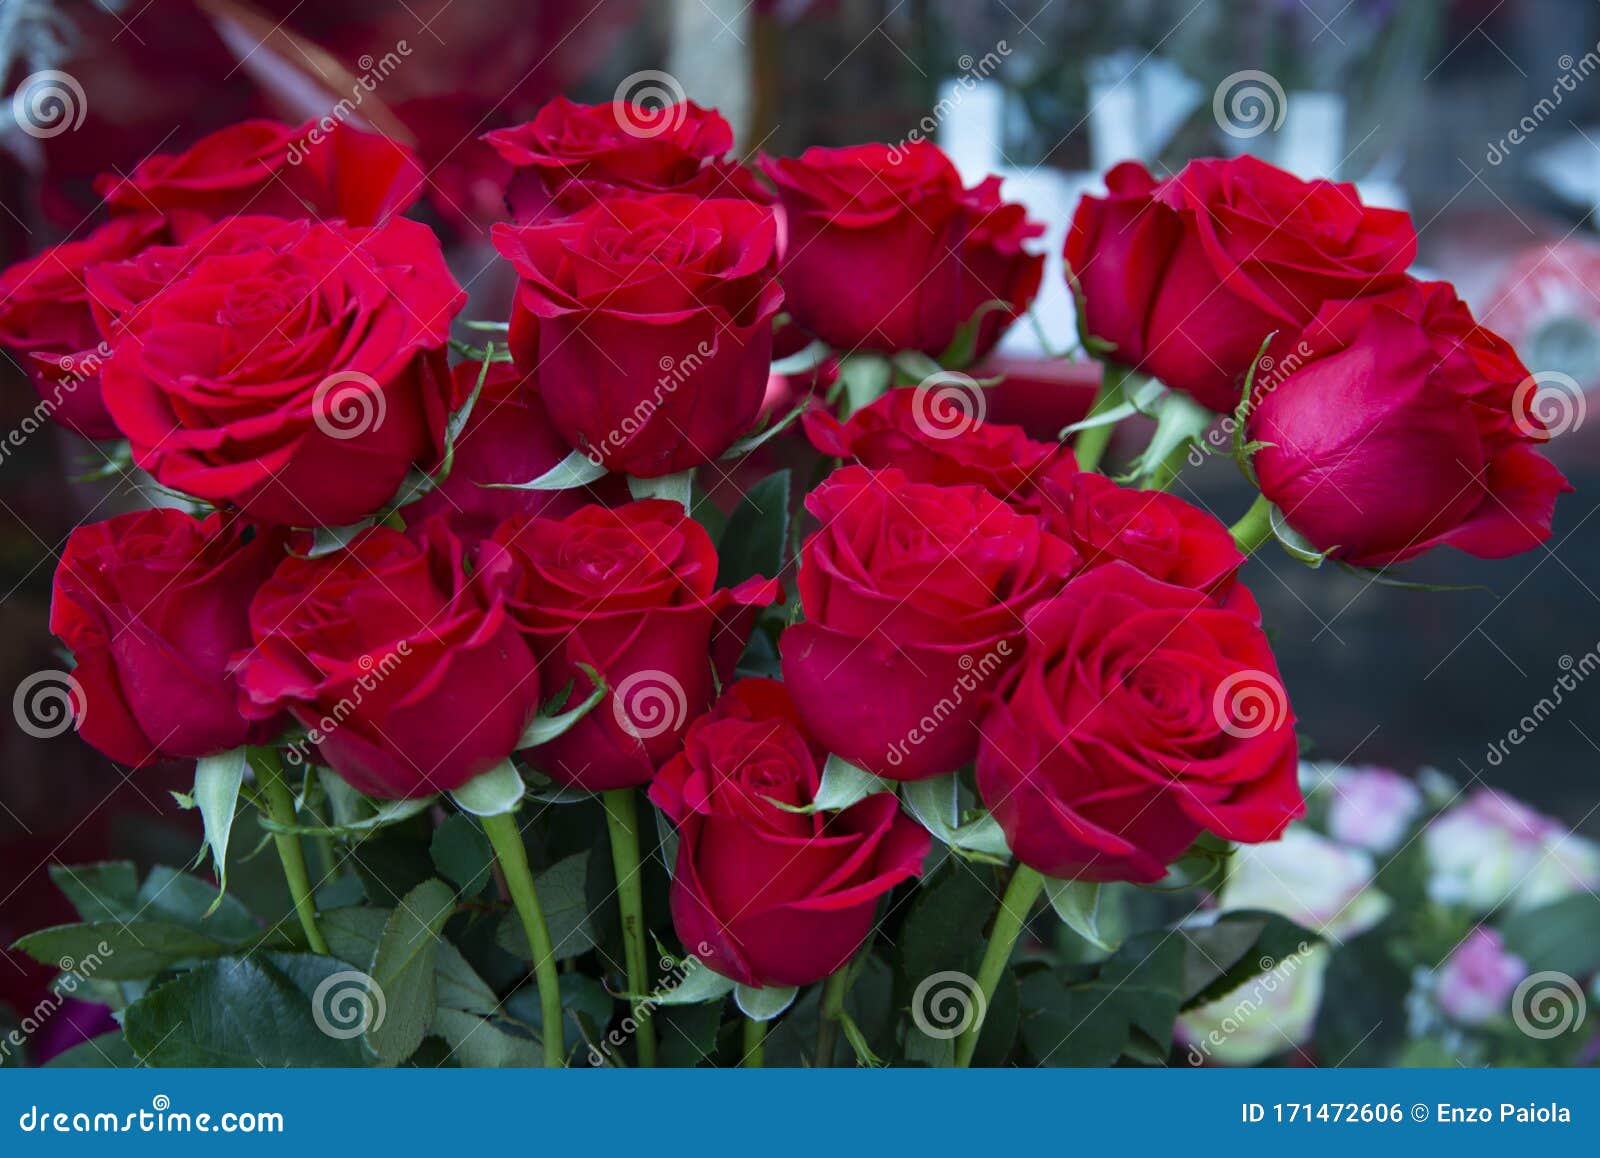 Bunch Of Beautiful Red Roses Stock Photo Image Of Blossom Couple 171472606